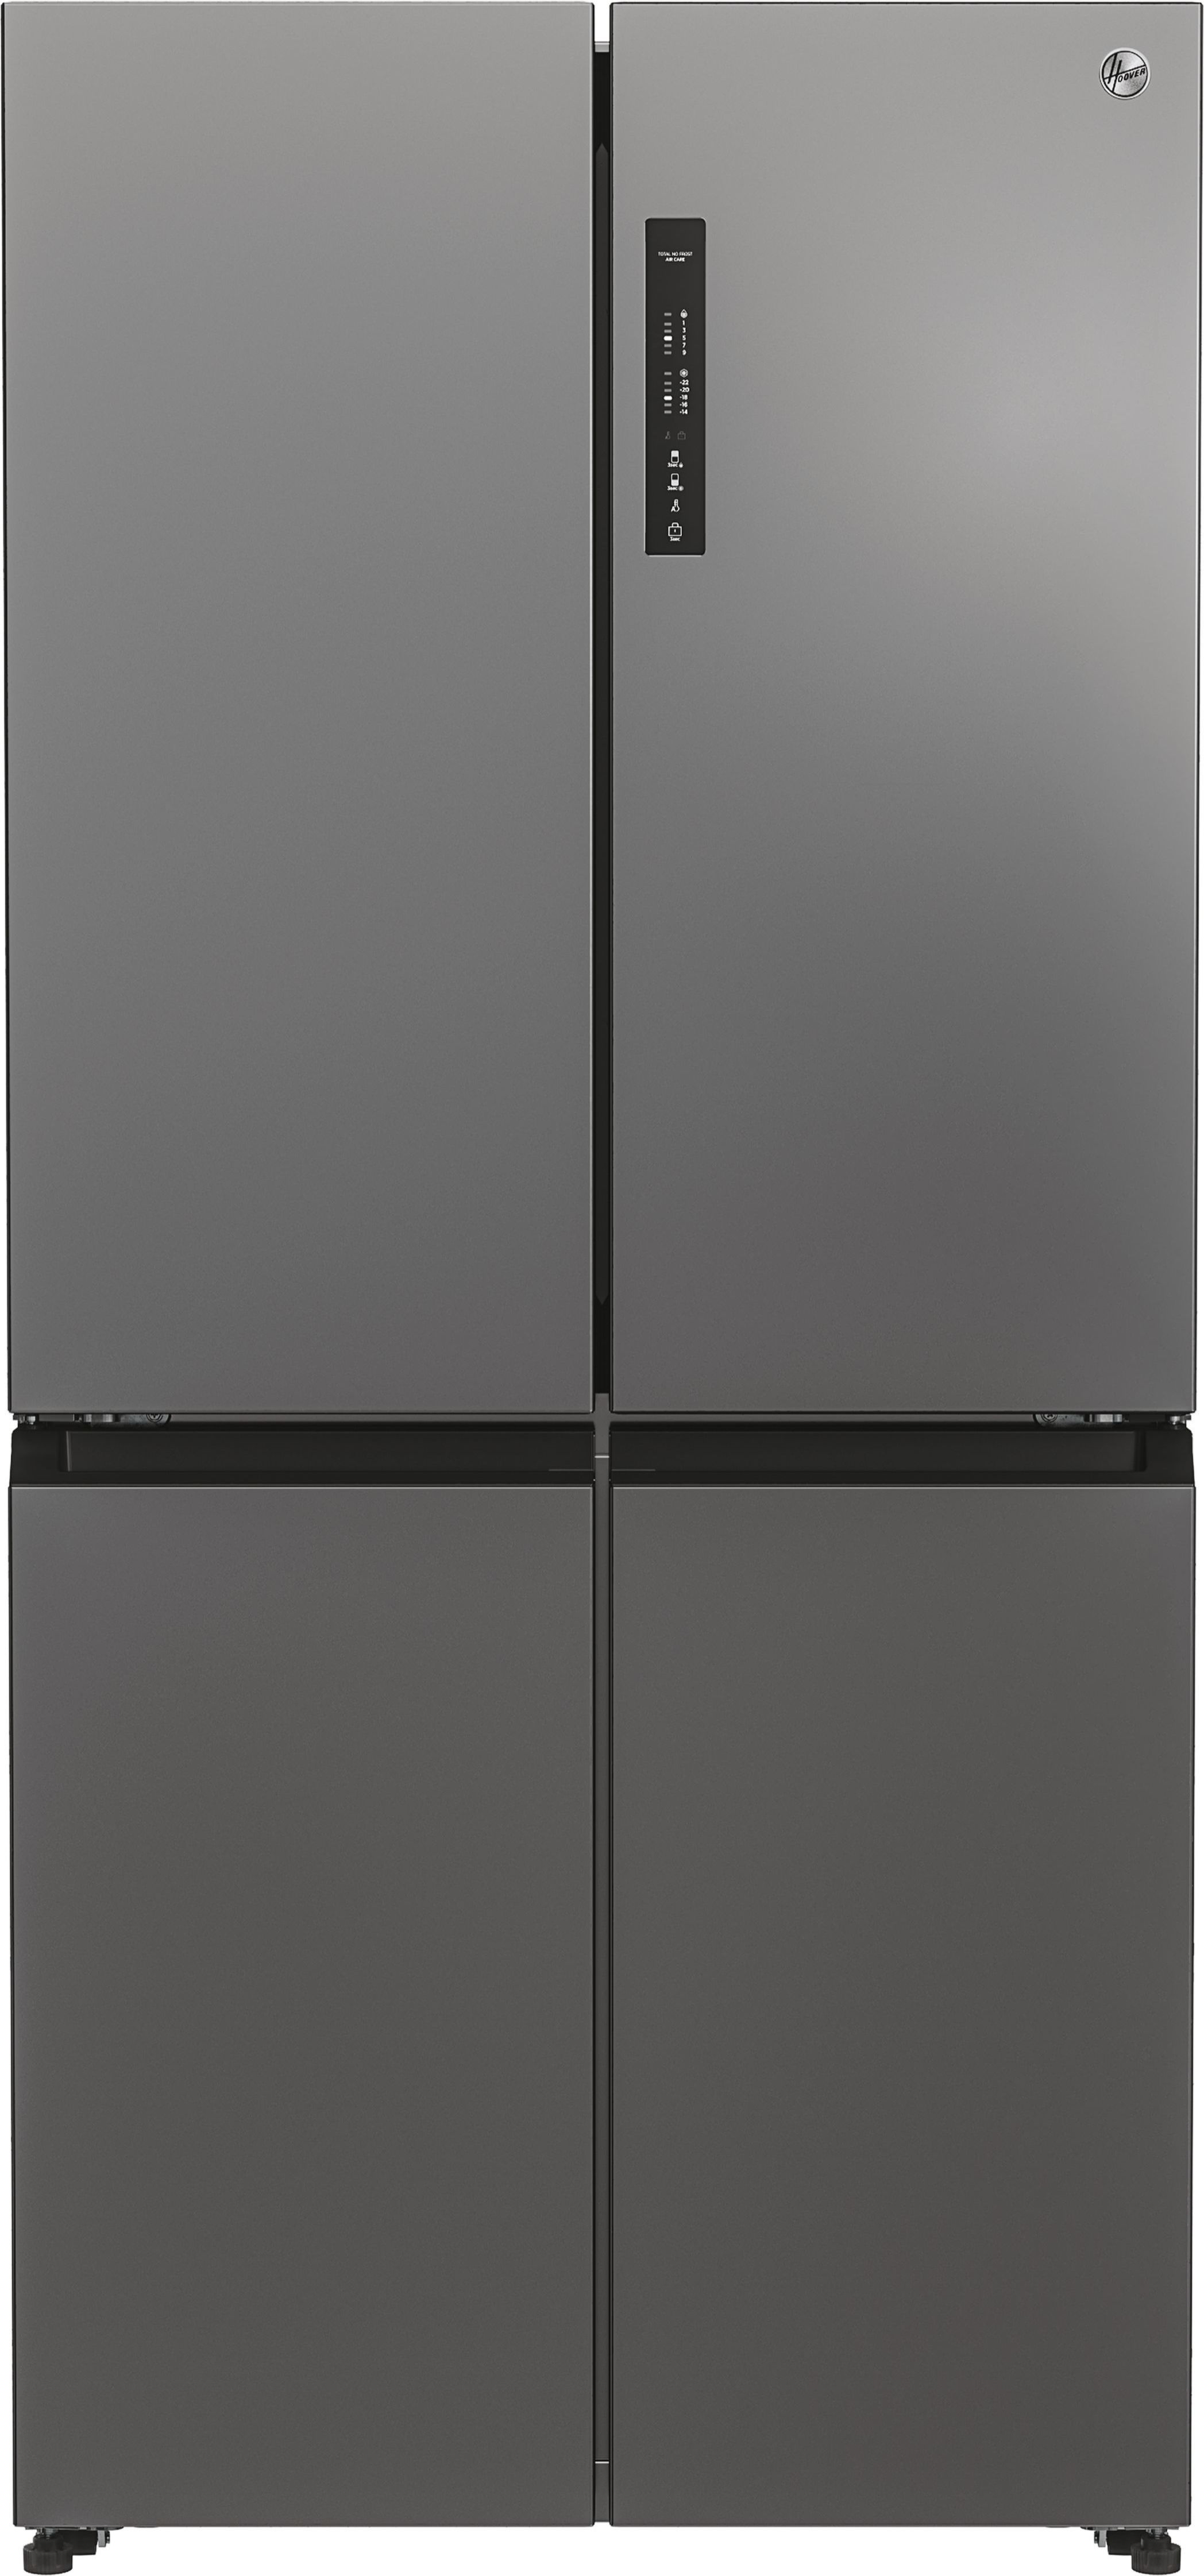 Hoover HHCR3818ENPL Non-Plumbed Total No Frost American Fridge Freezer - Inox - E Rated, Stainless Steel